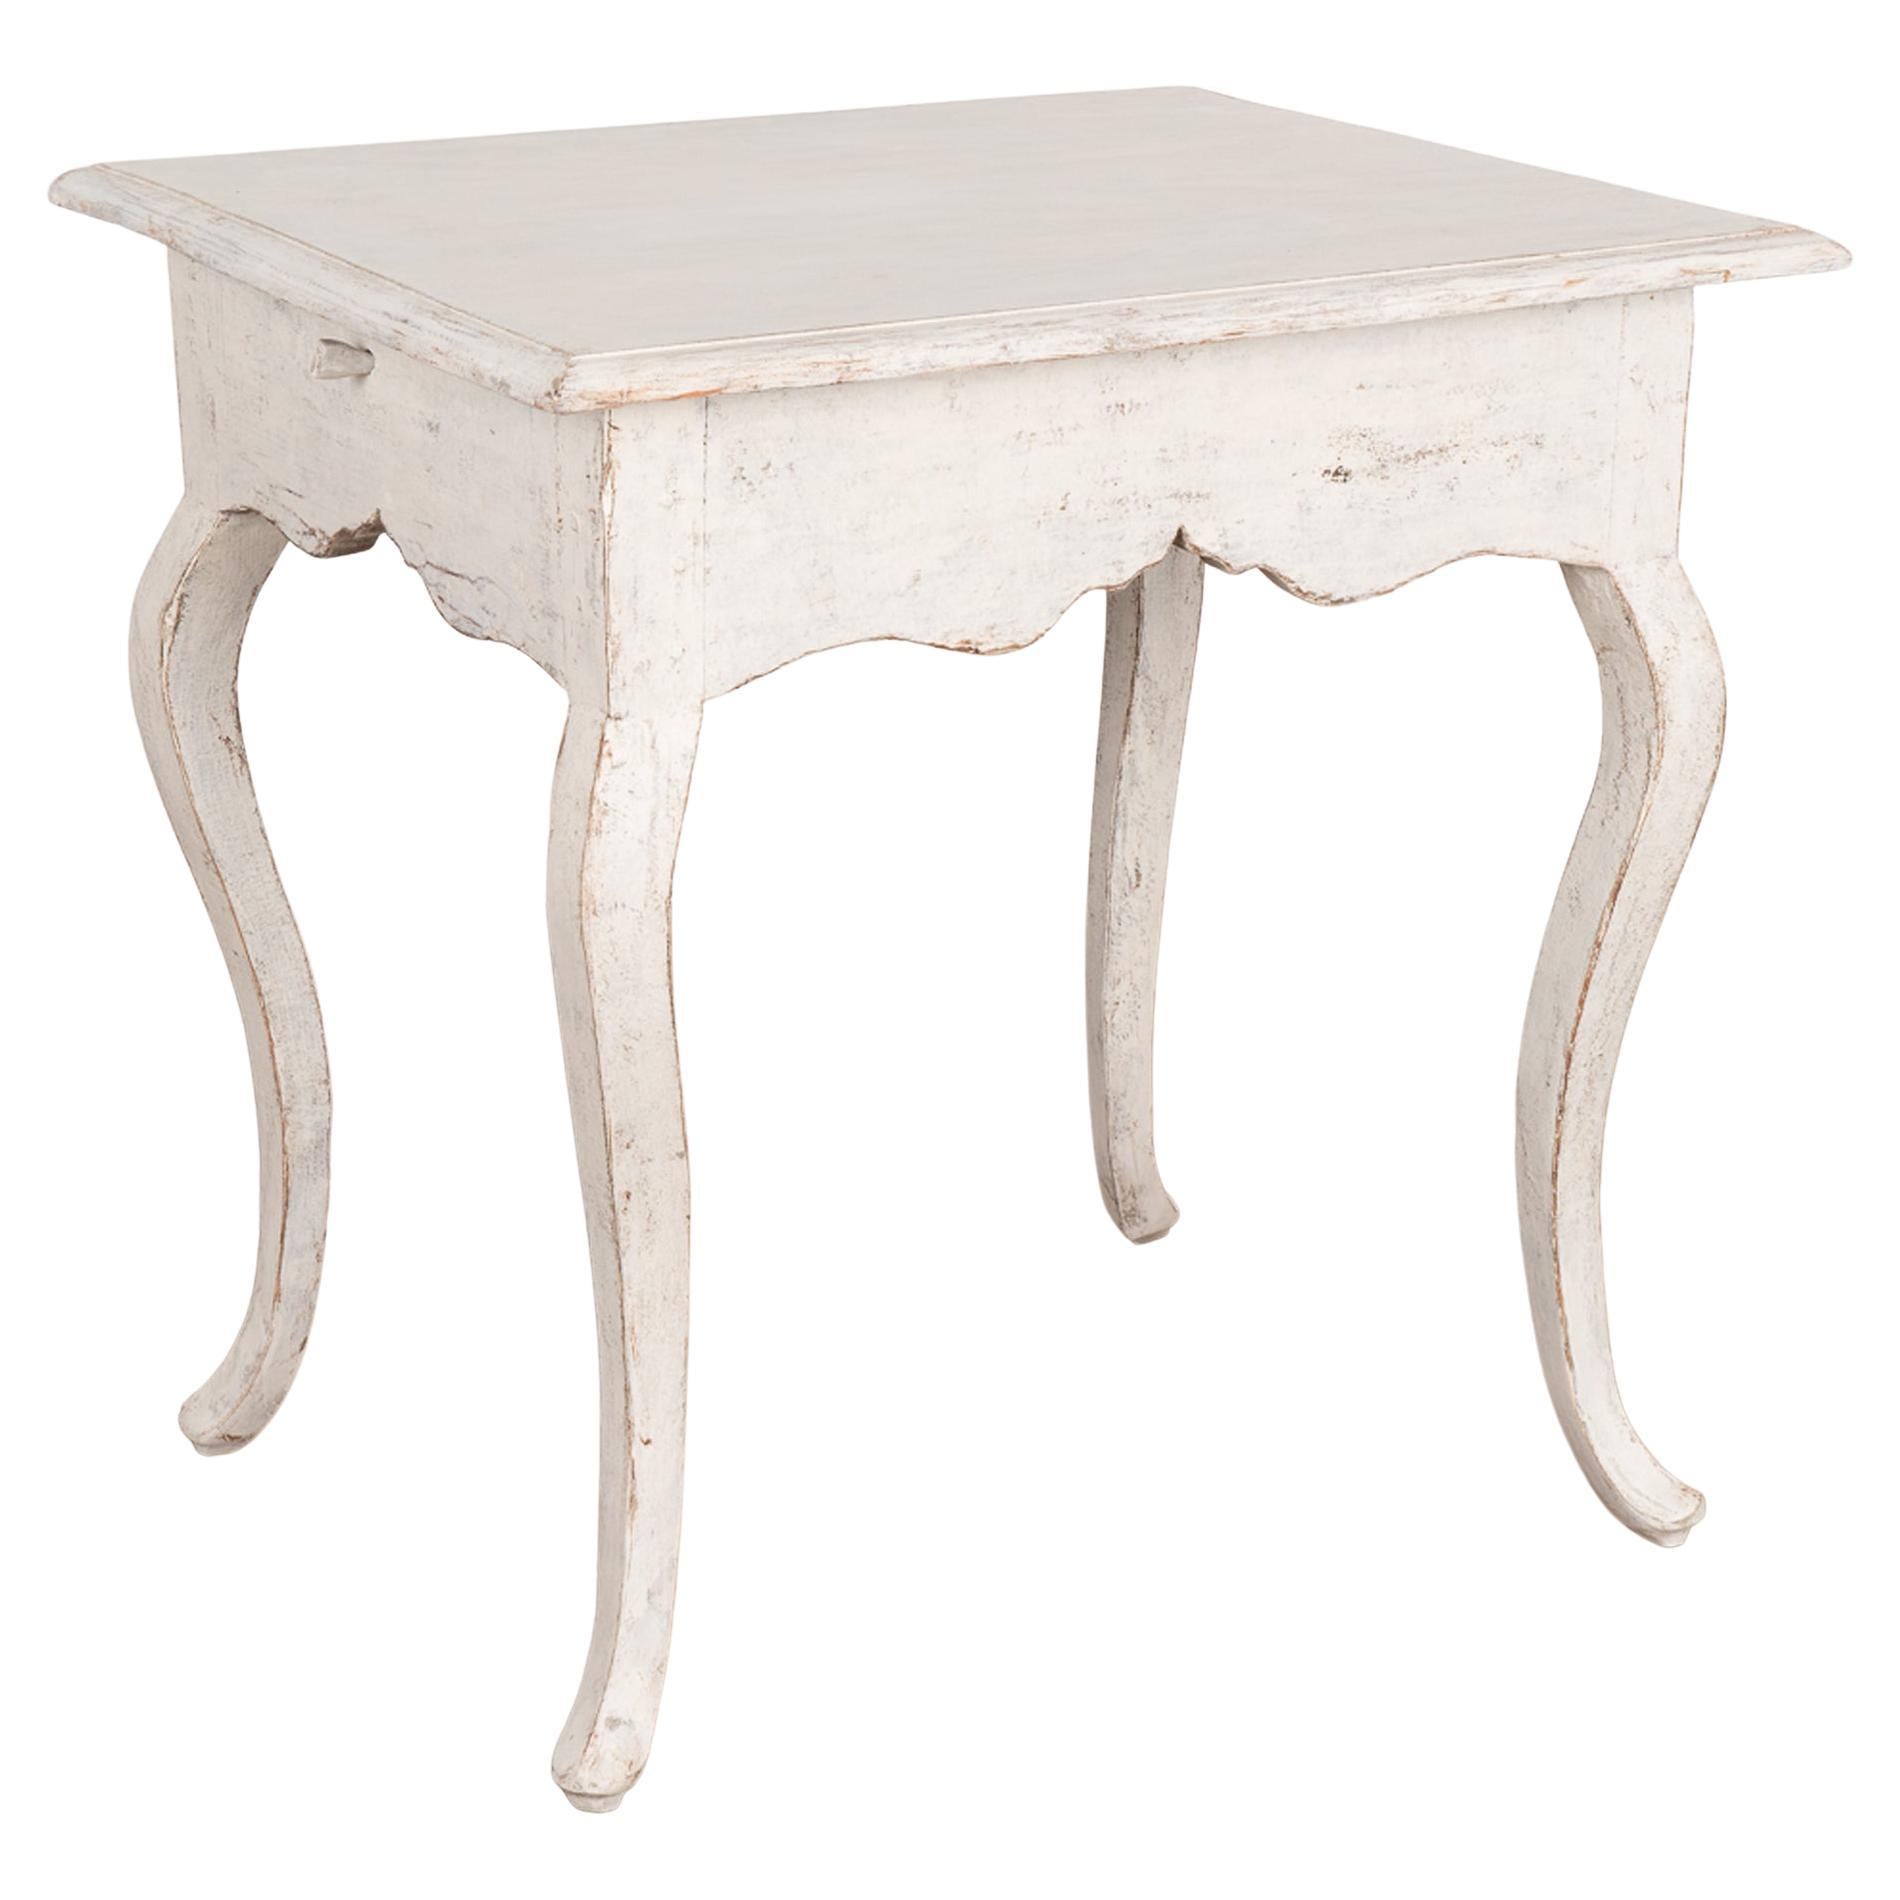 White Gustavian Side Table with Cabriolet Legs, Sweden circa 1800-20 For Sale